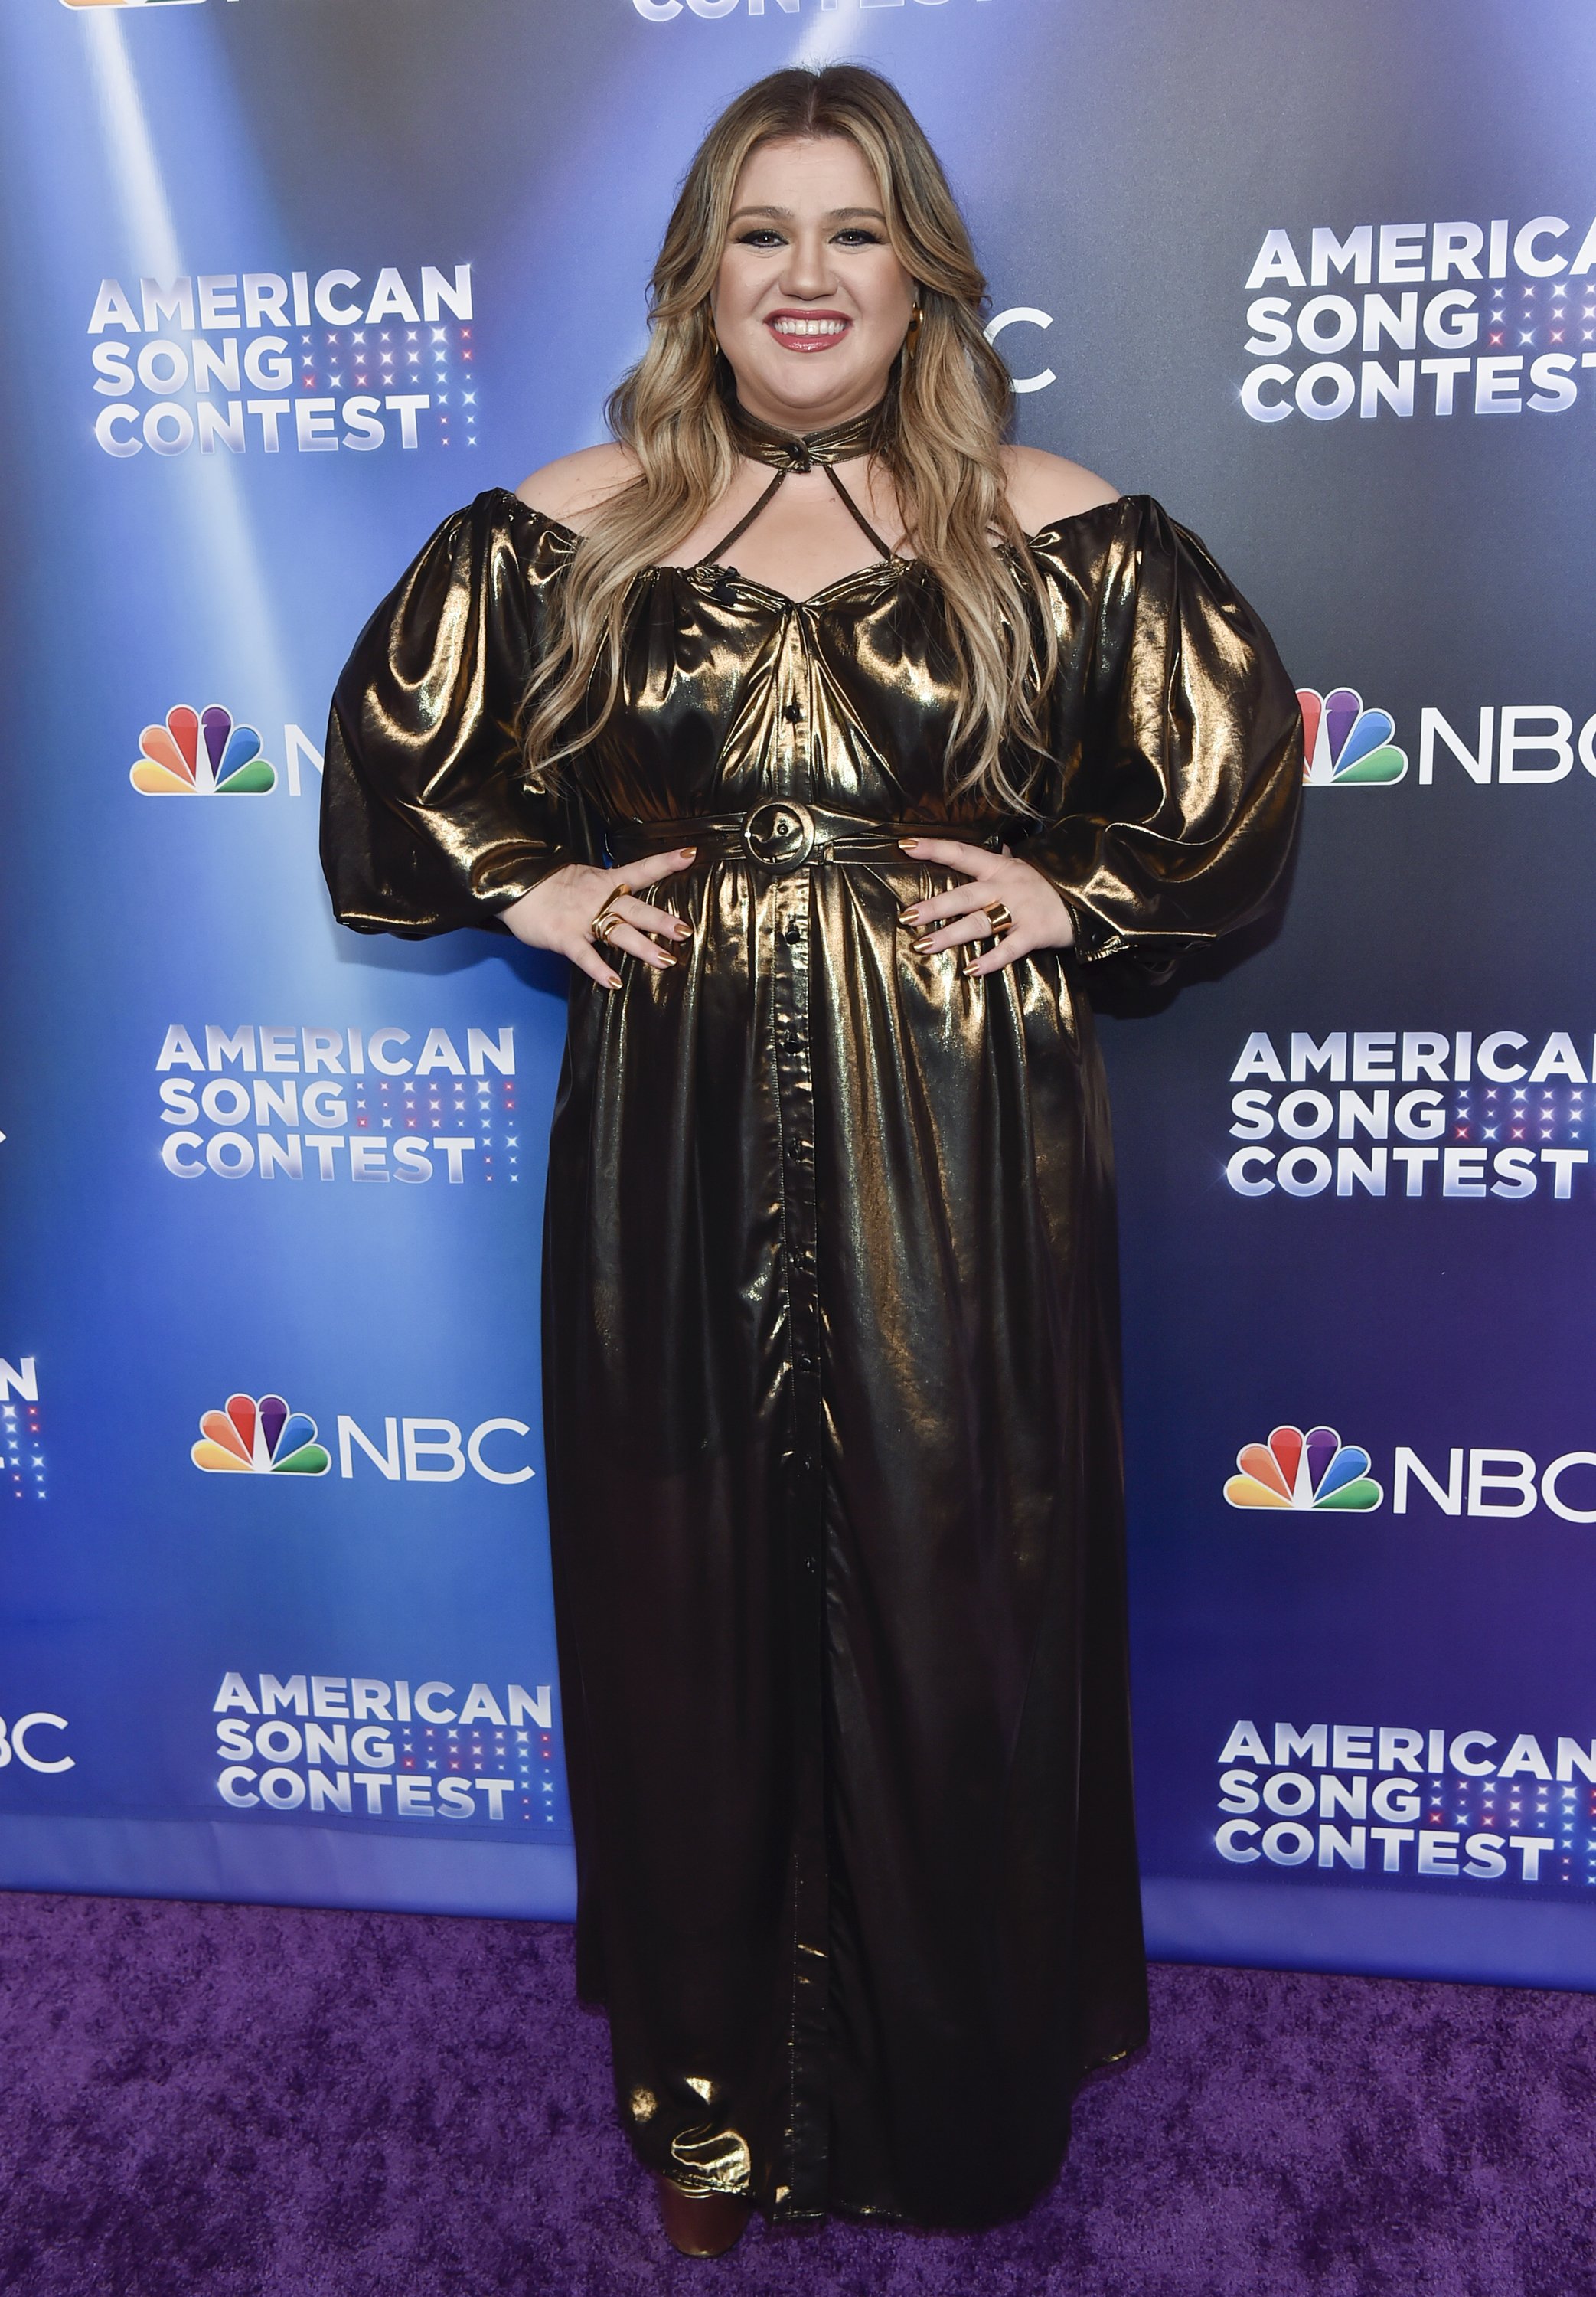     Kelly Clarkson attends NBC "American song contest" Week 4 at Universal Studios Hollywood on April 11, 2022 in Universal City, California.  |  Source: Getty Images